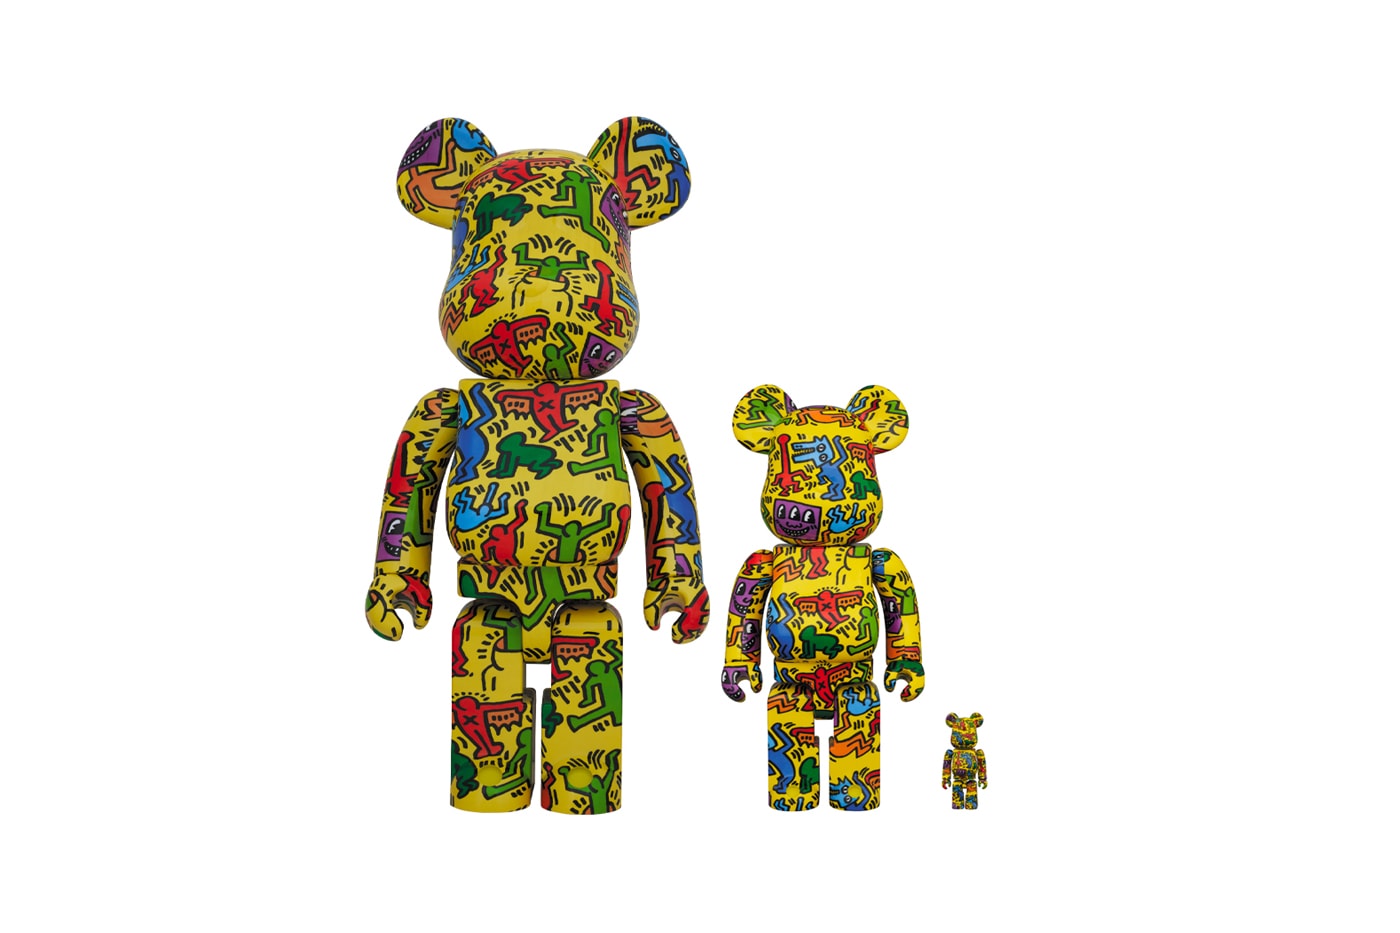 Medicom Toy Drops New jean michel- Basquiat & keith haring Haring BE@RBRICKs 100% 400% 1000% release price info artworks 